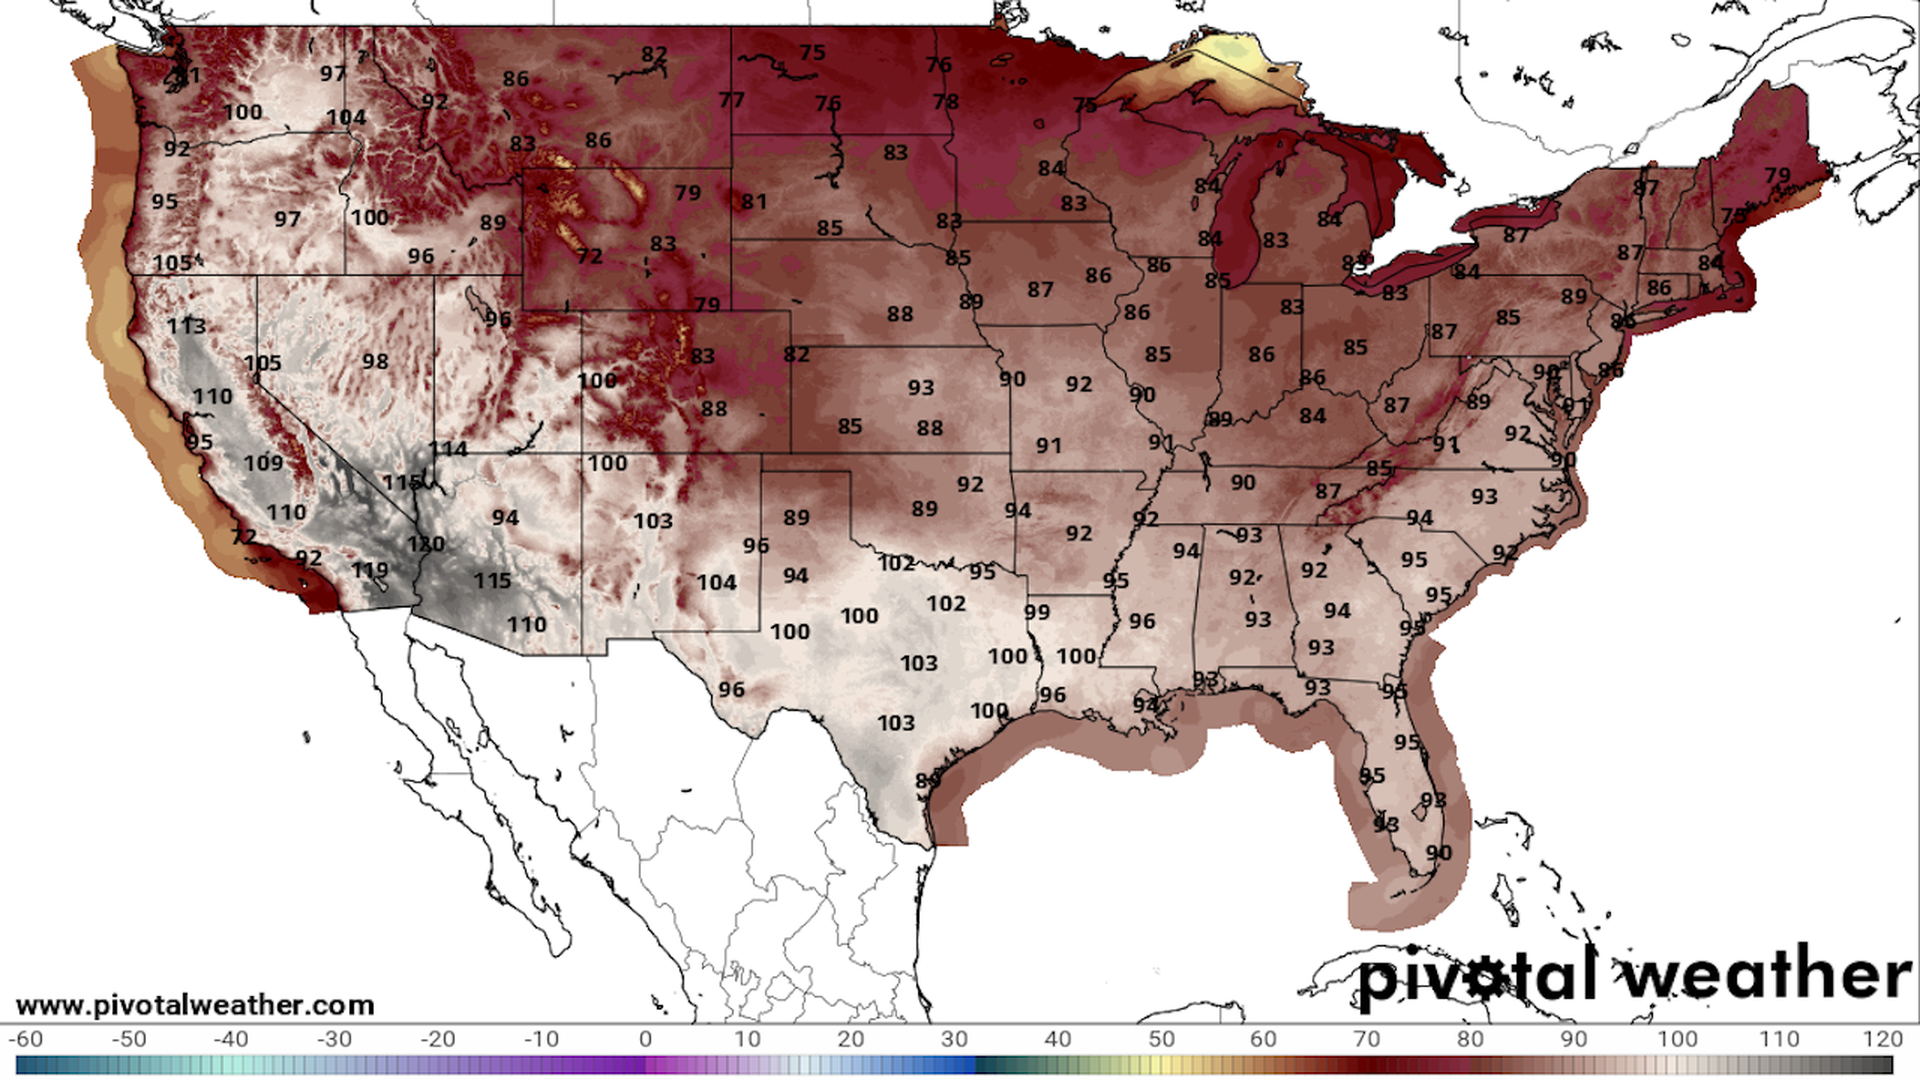 Forecast high temperatures for July 16.